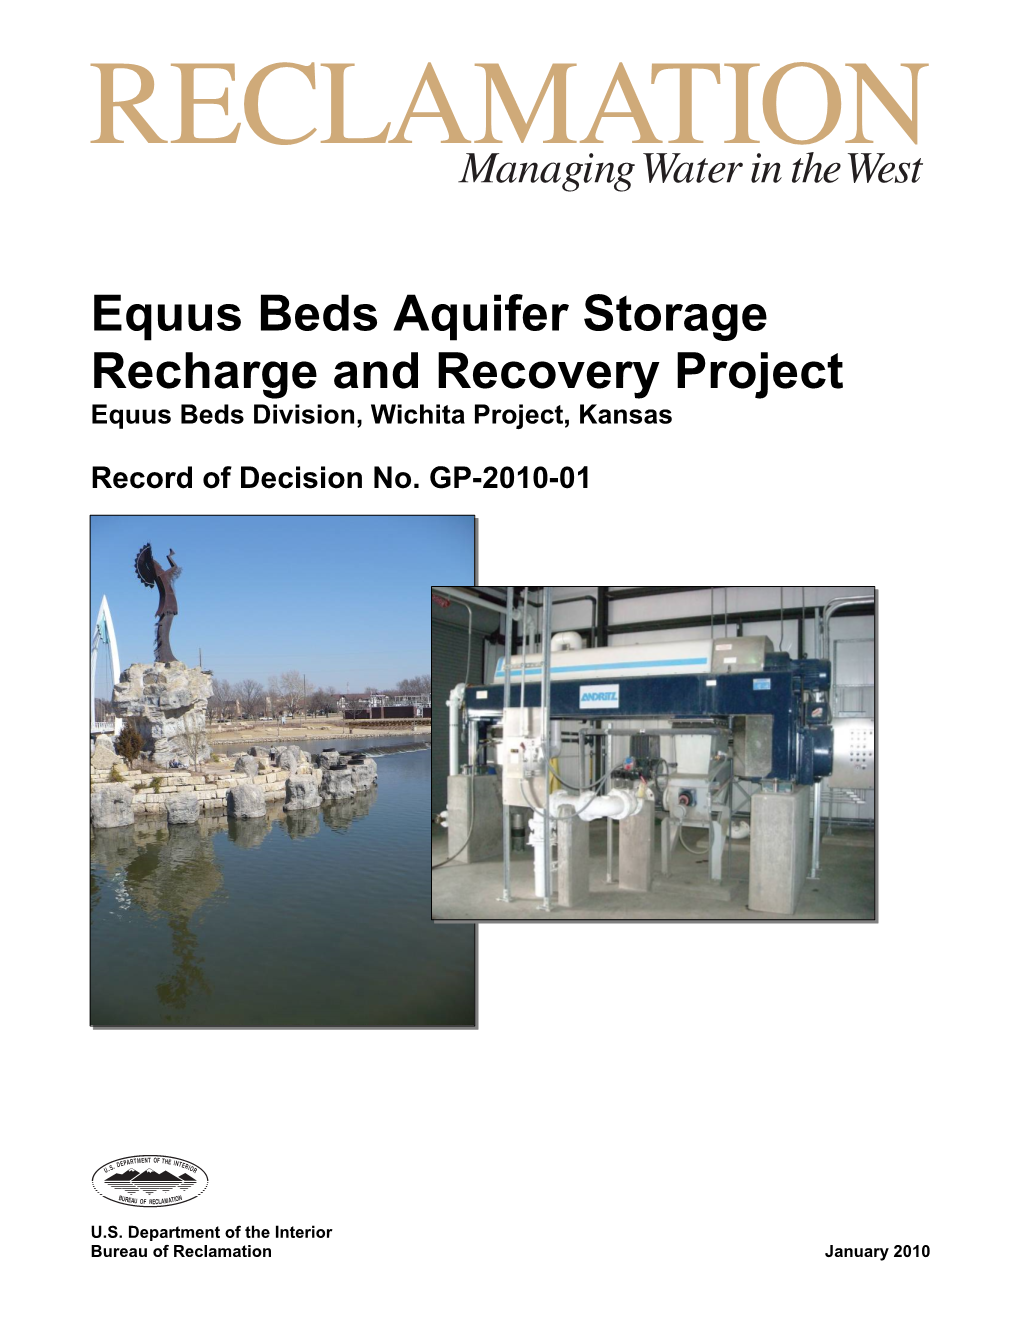 Equus Beds Aquifer Storage Recharge and Recovery Project Equus Beds Division, Wichita Project, Kansas